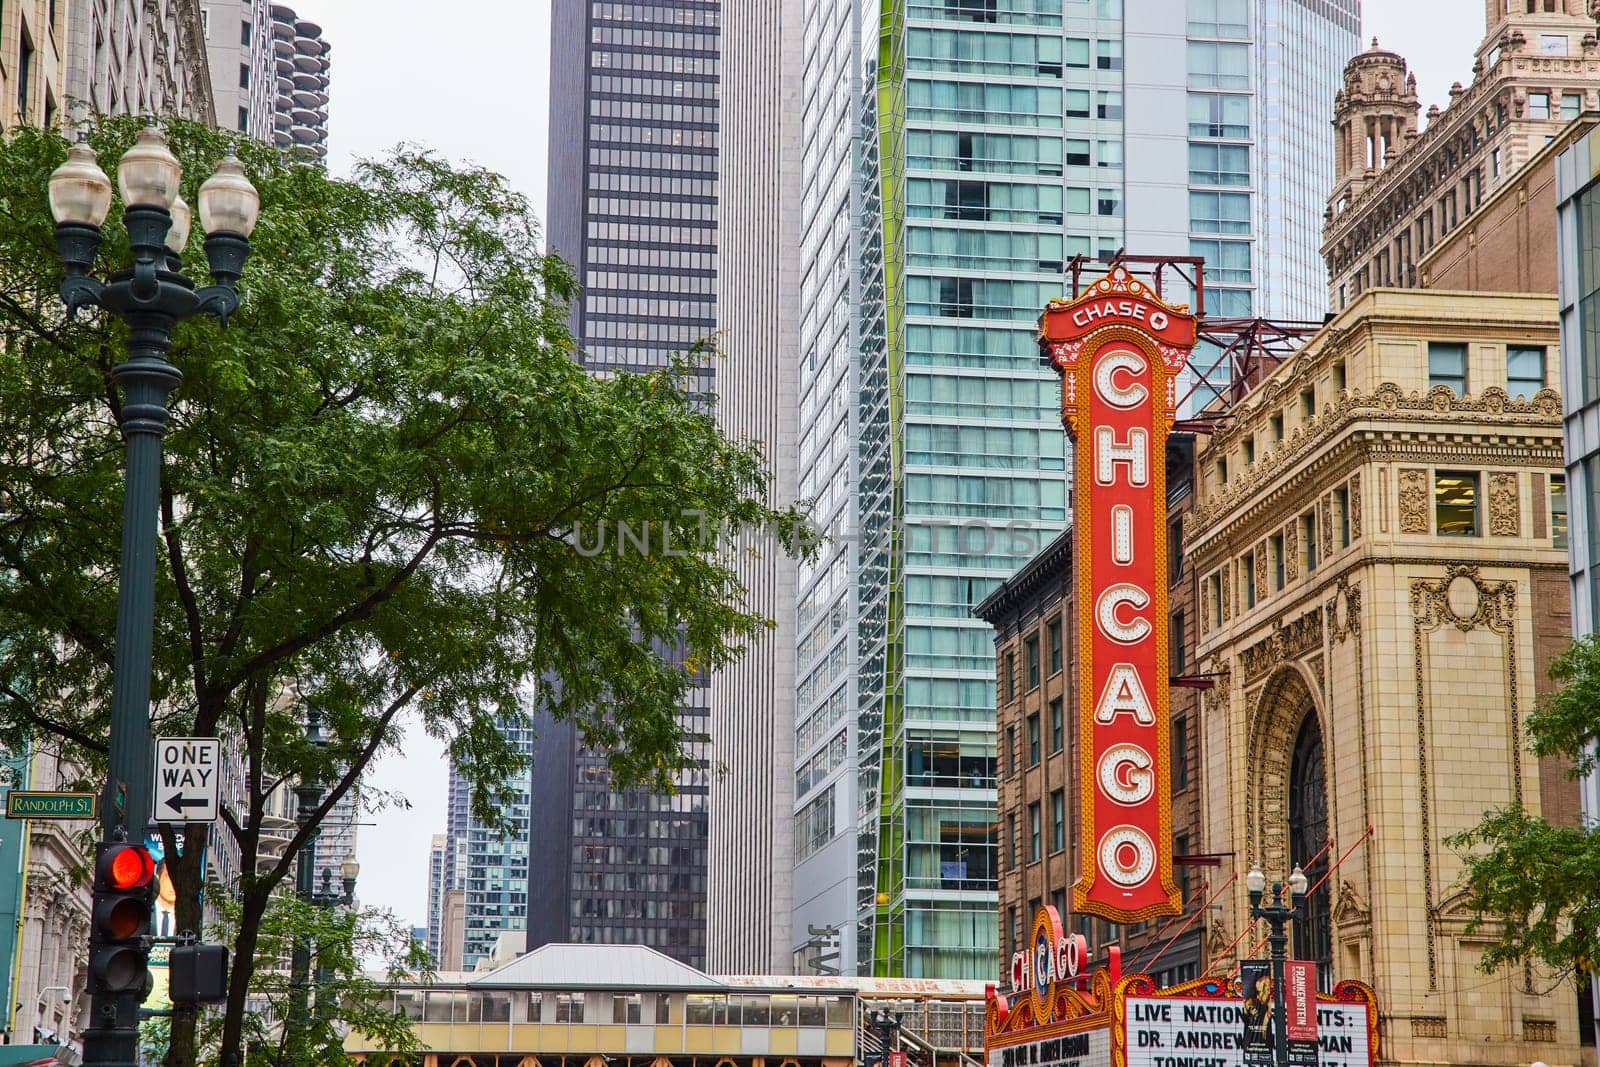 Large orange sign with Chicago in white lettering in downtown of city, historic building by njproductions